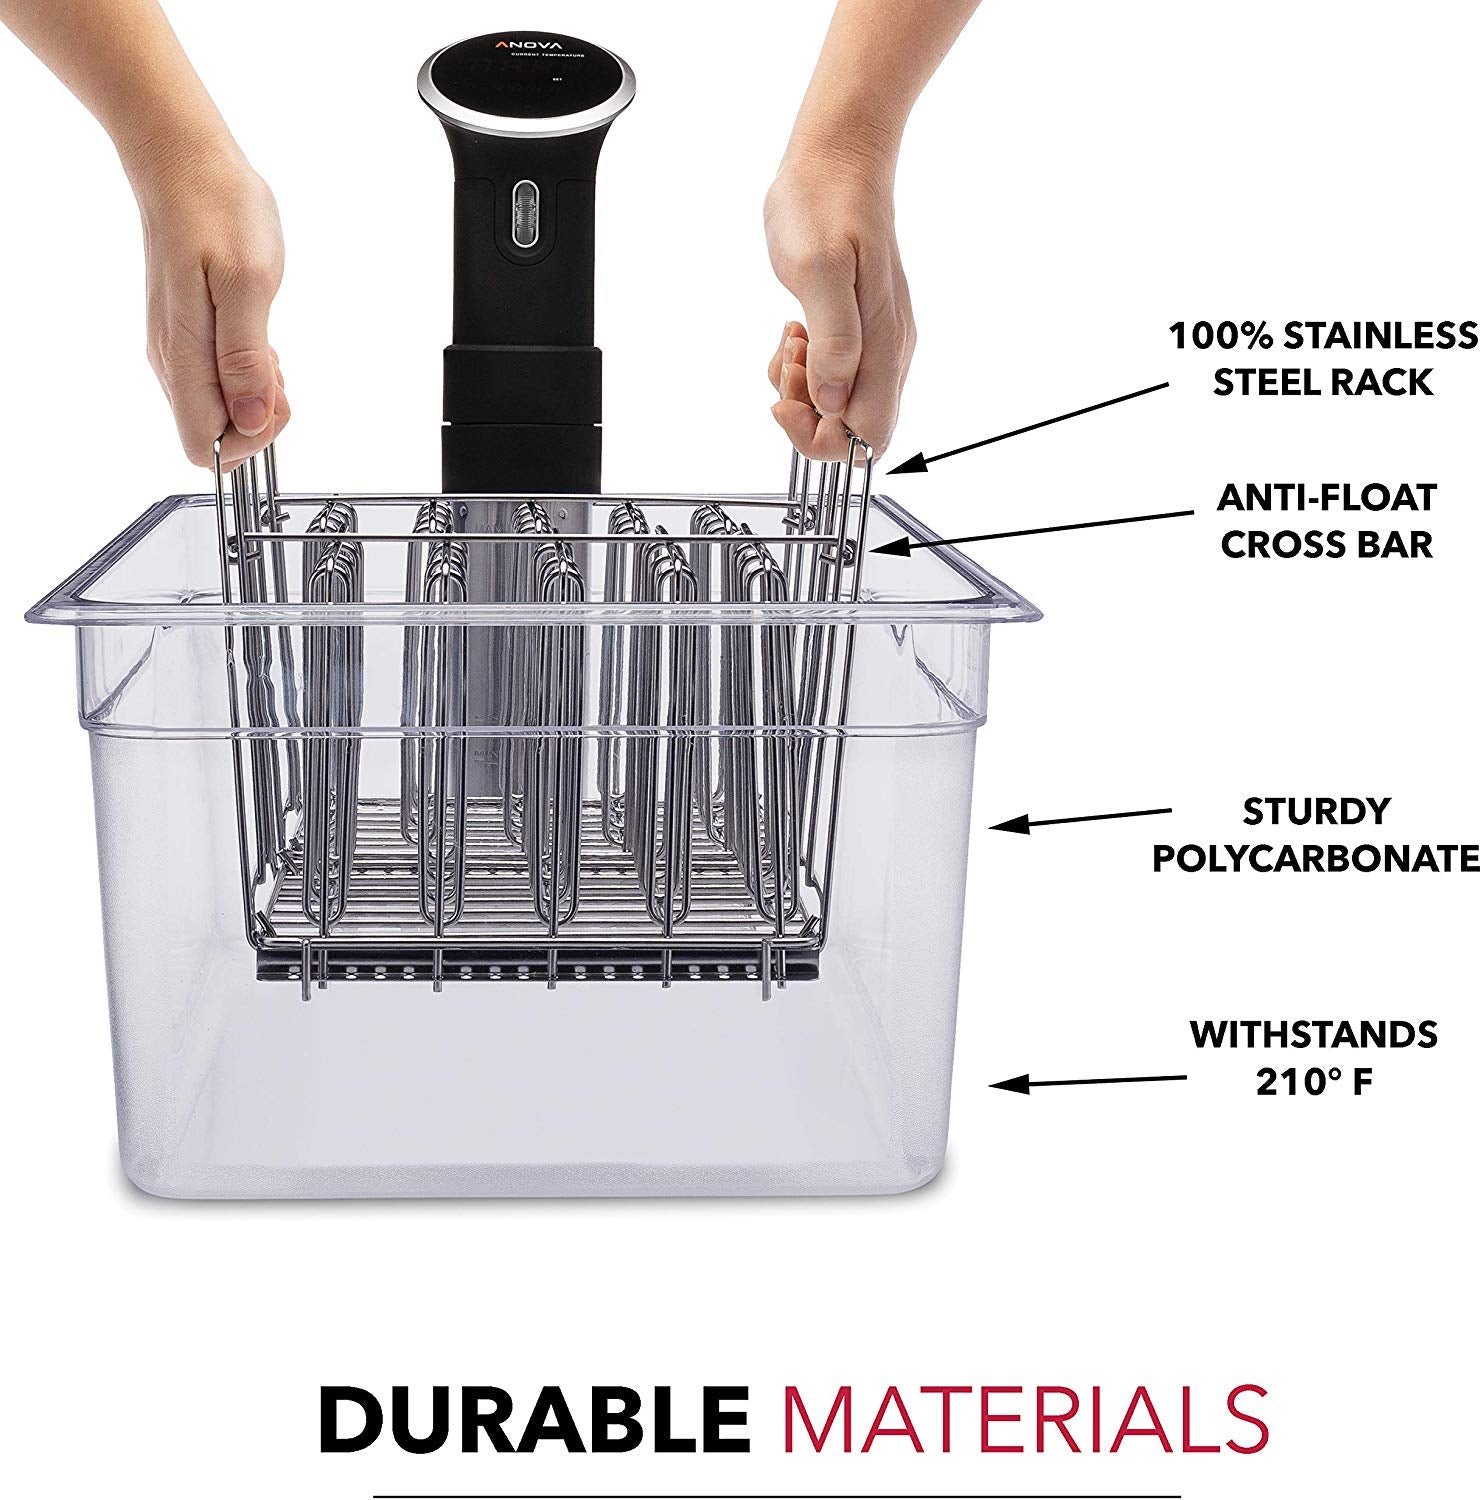 VÄESKE Large Sous Vide Container with Lid and Rack Kit | 26 Quart Size | Durable Polycarbonate and Rust-Resistant Stainless Steel Sous Vide Accessories | Works with Most Sous Vide Cookers